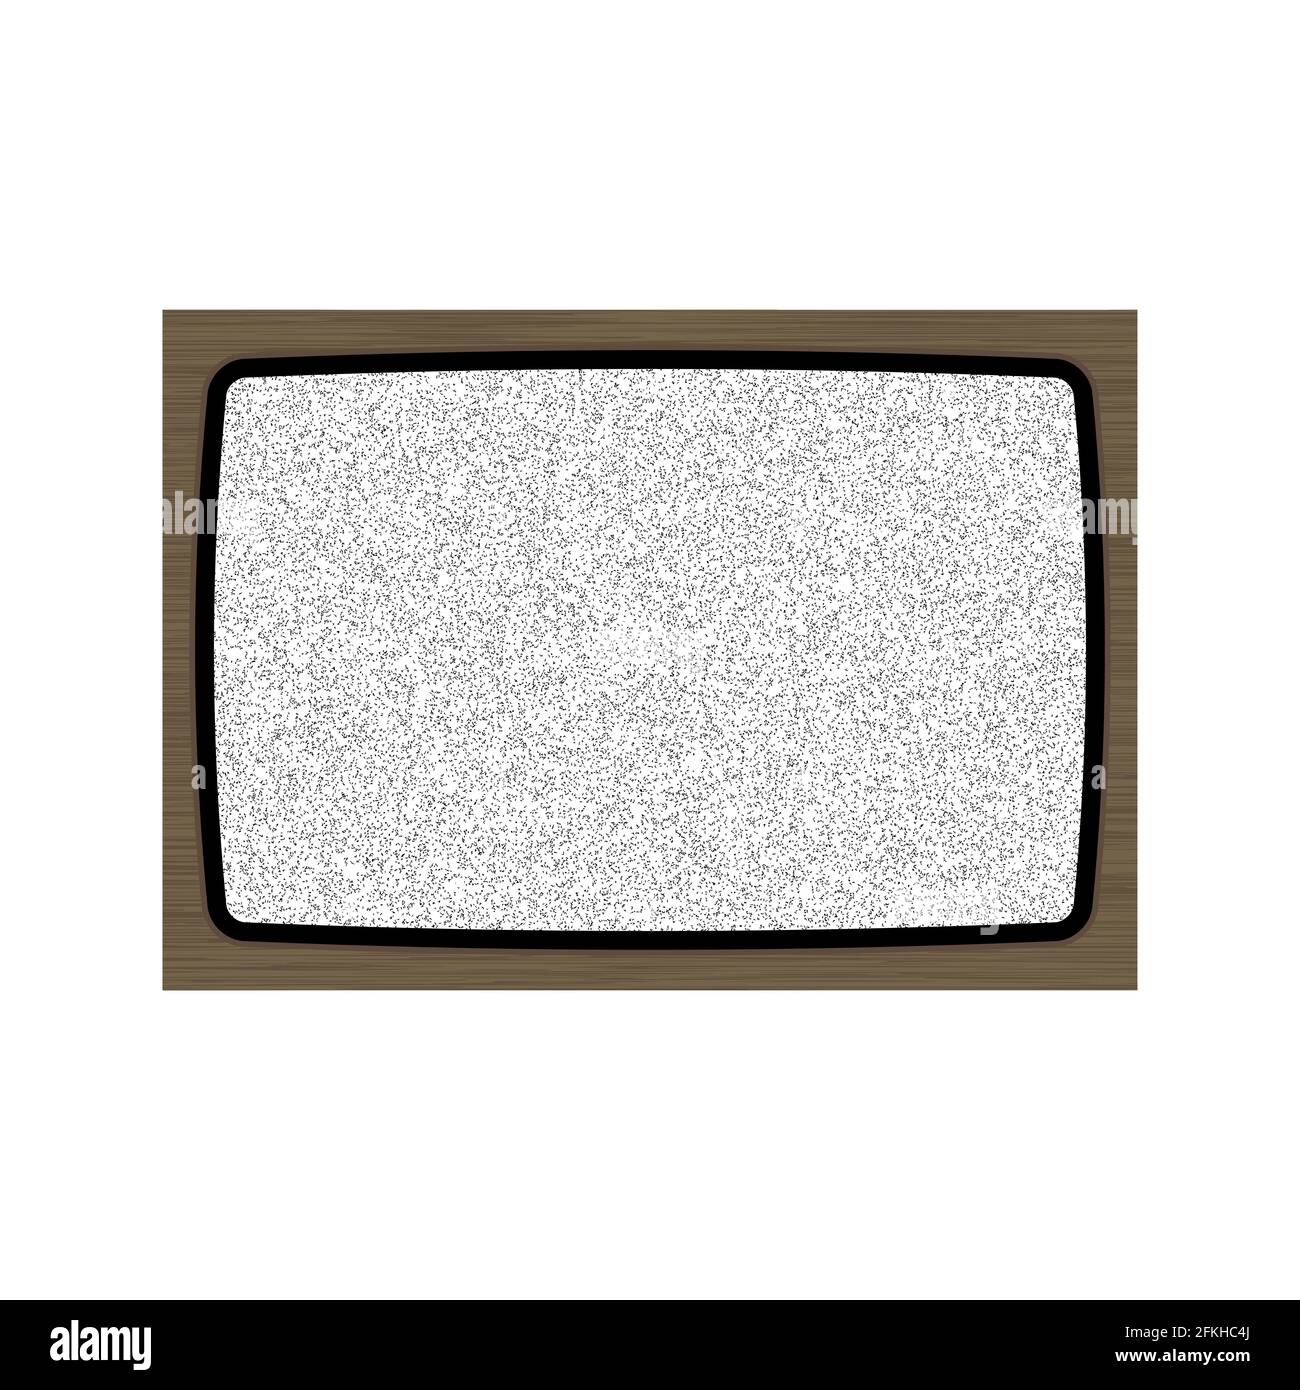 Old TV no signal screen. Vintage wooden tv set, display with noise. Flat illustration isolated on white. Stock Photo